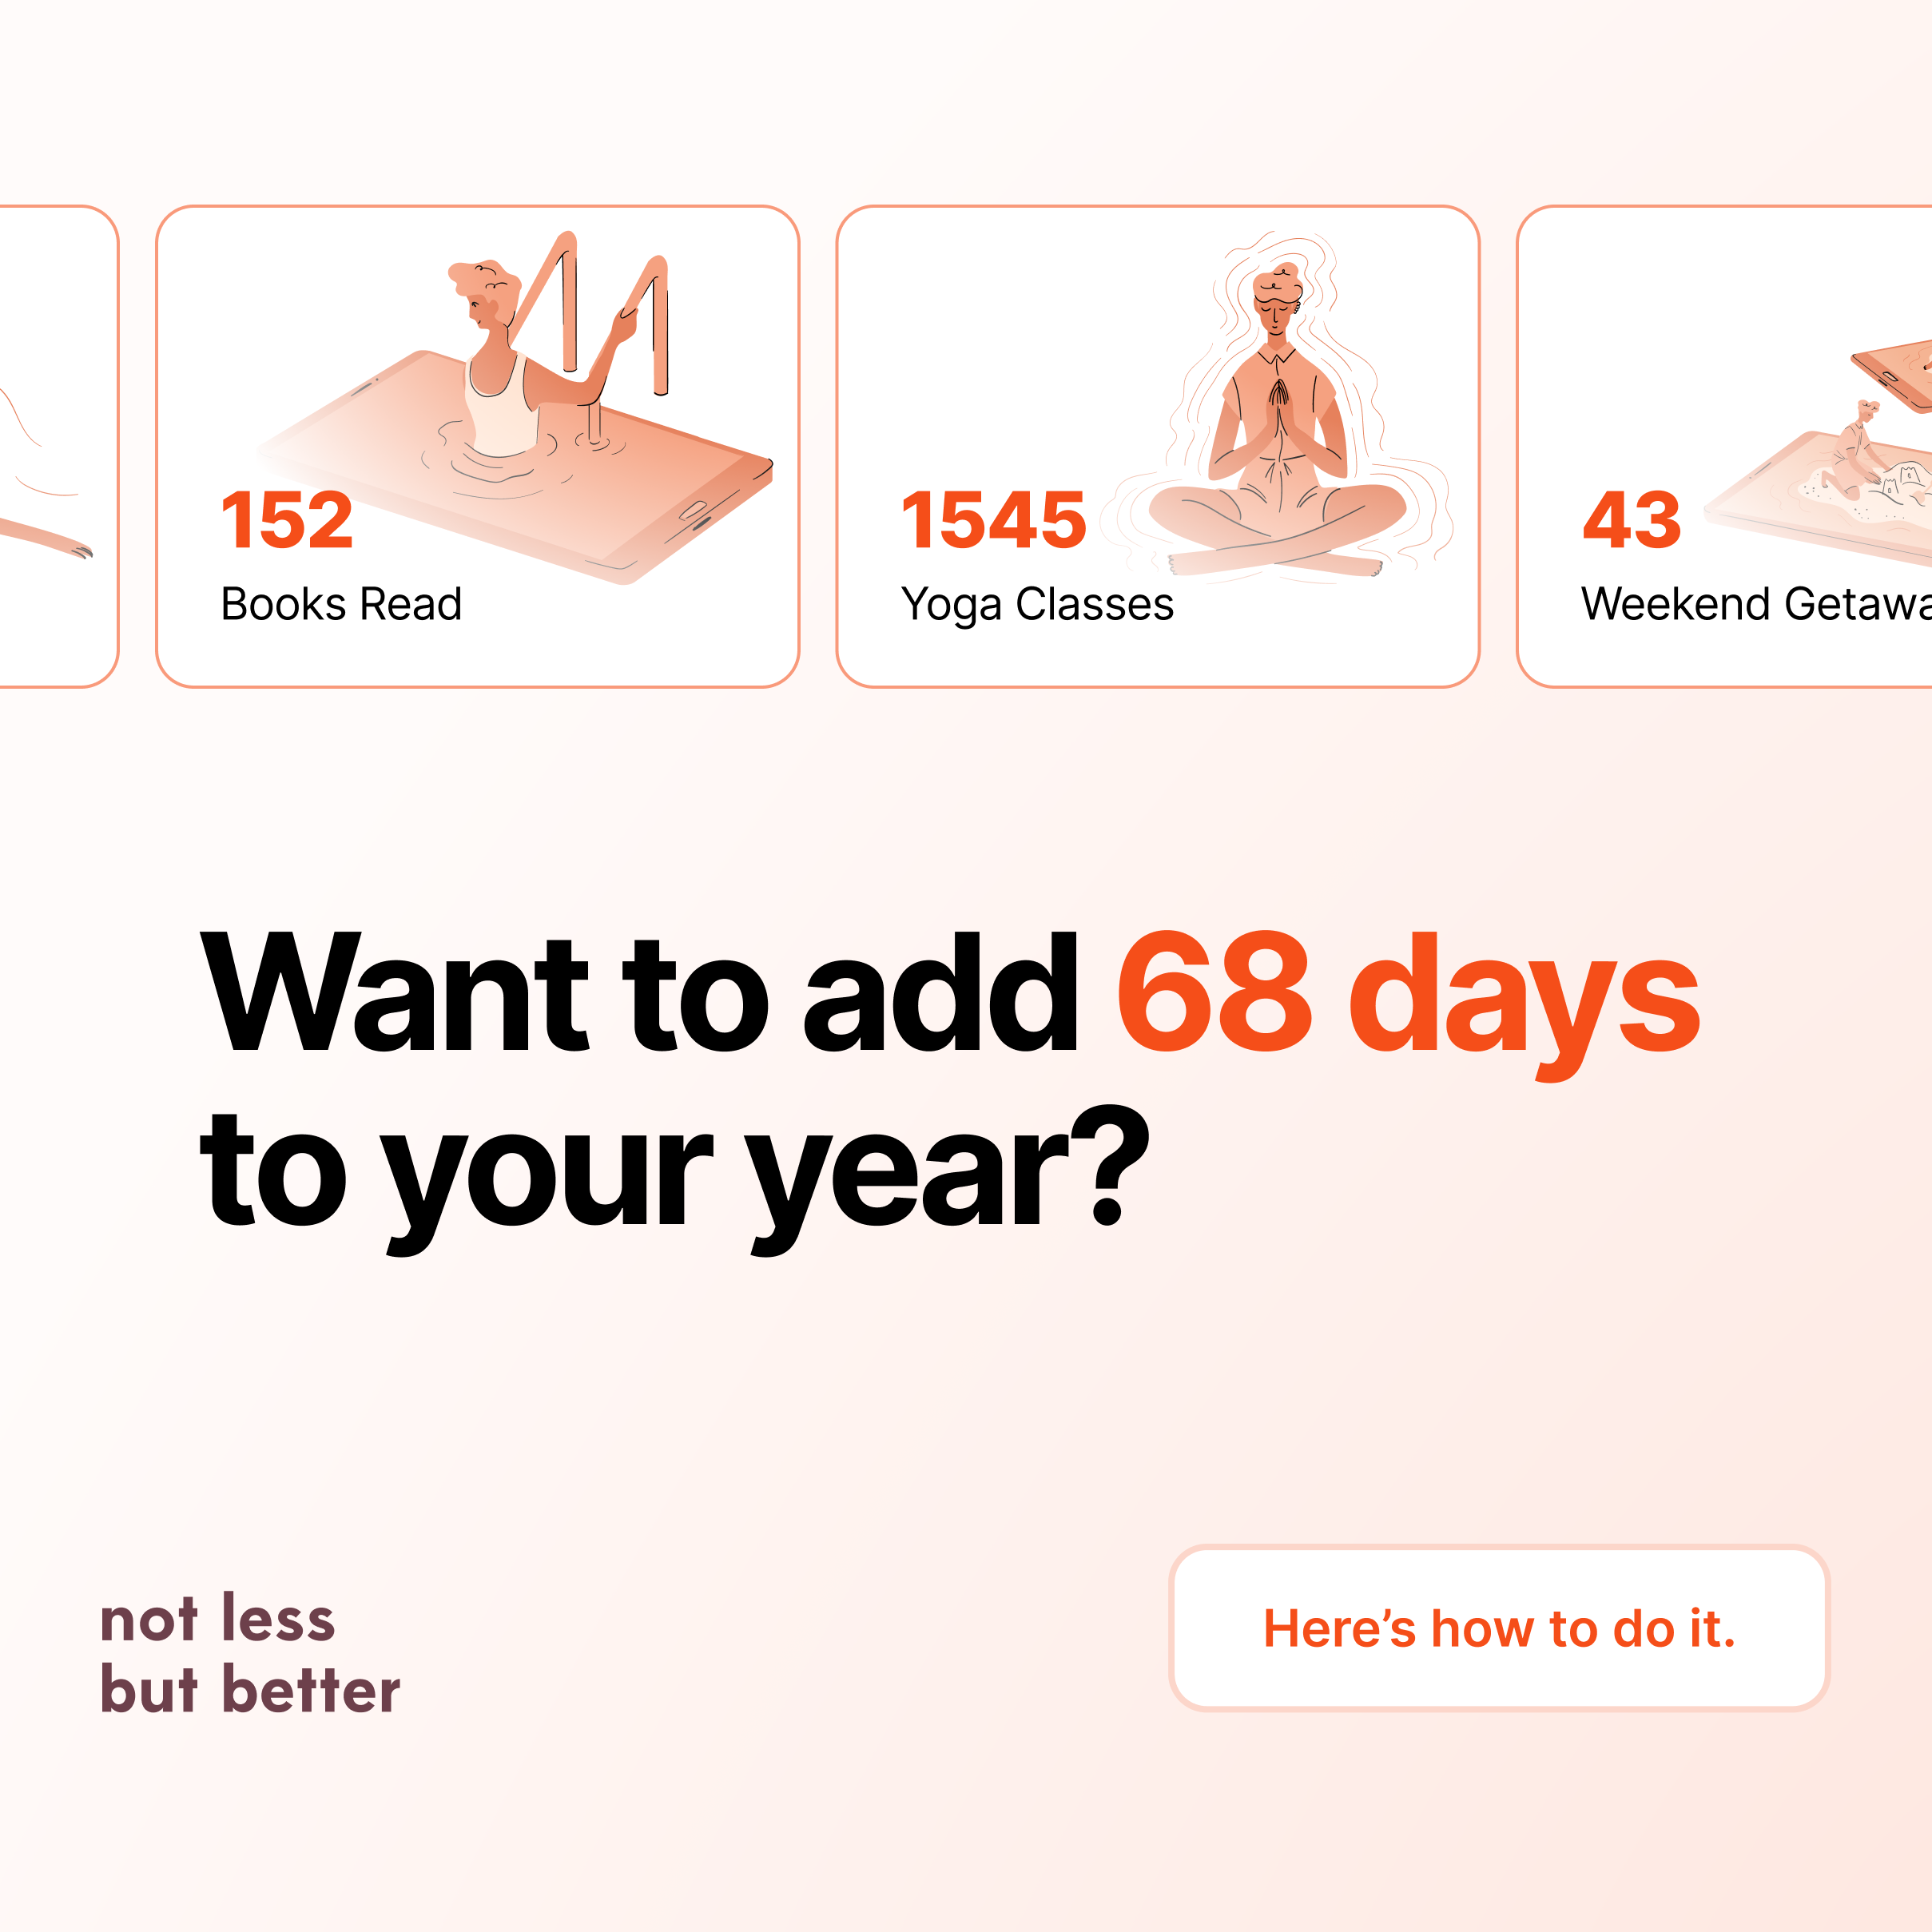 Social media graphic: "Want to add 68 days to your year?"